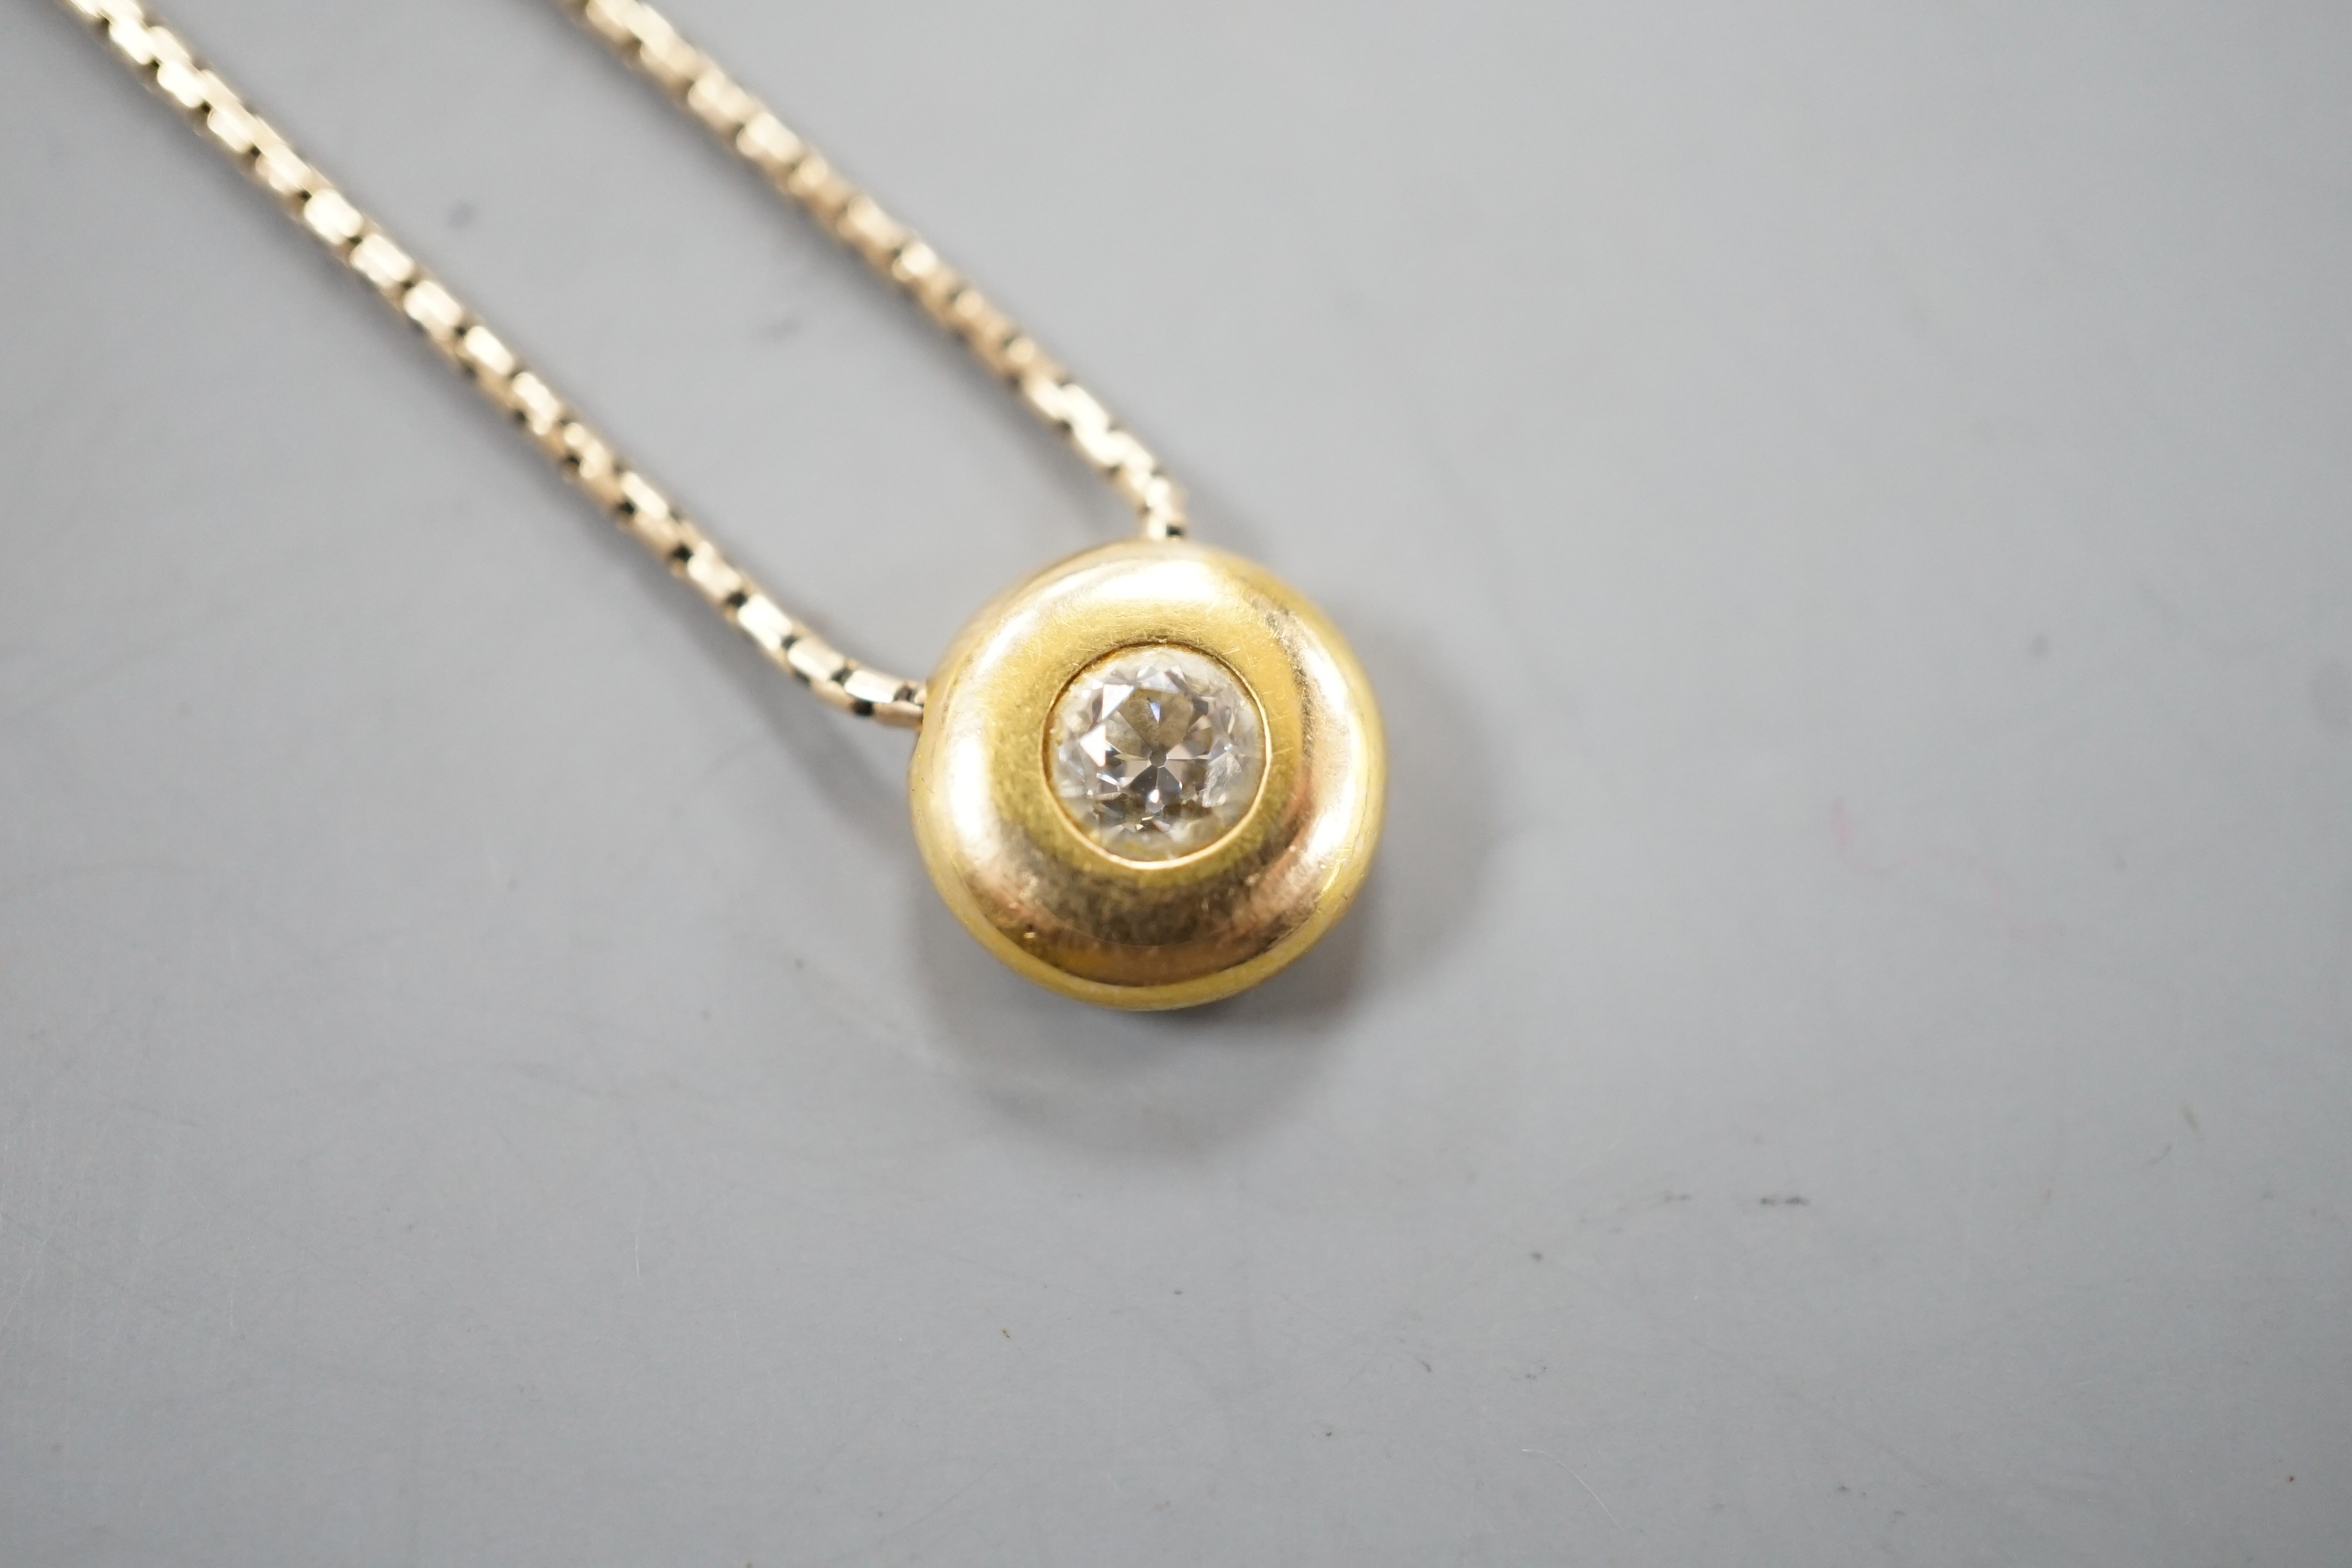 A modern 9ct gold and solitaire diamond set pendant necklace, pendant 9mm, chain, 39cm, gross weight 4.5 grams.